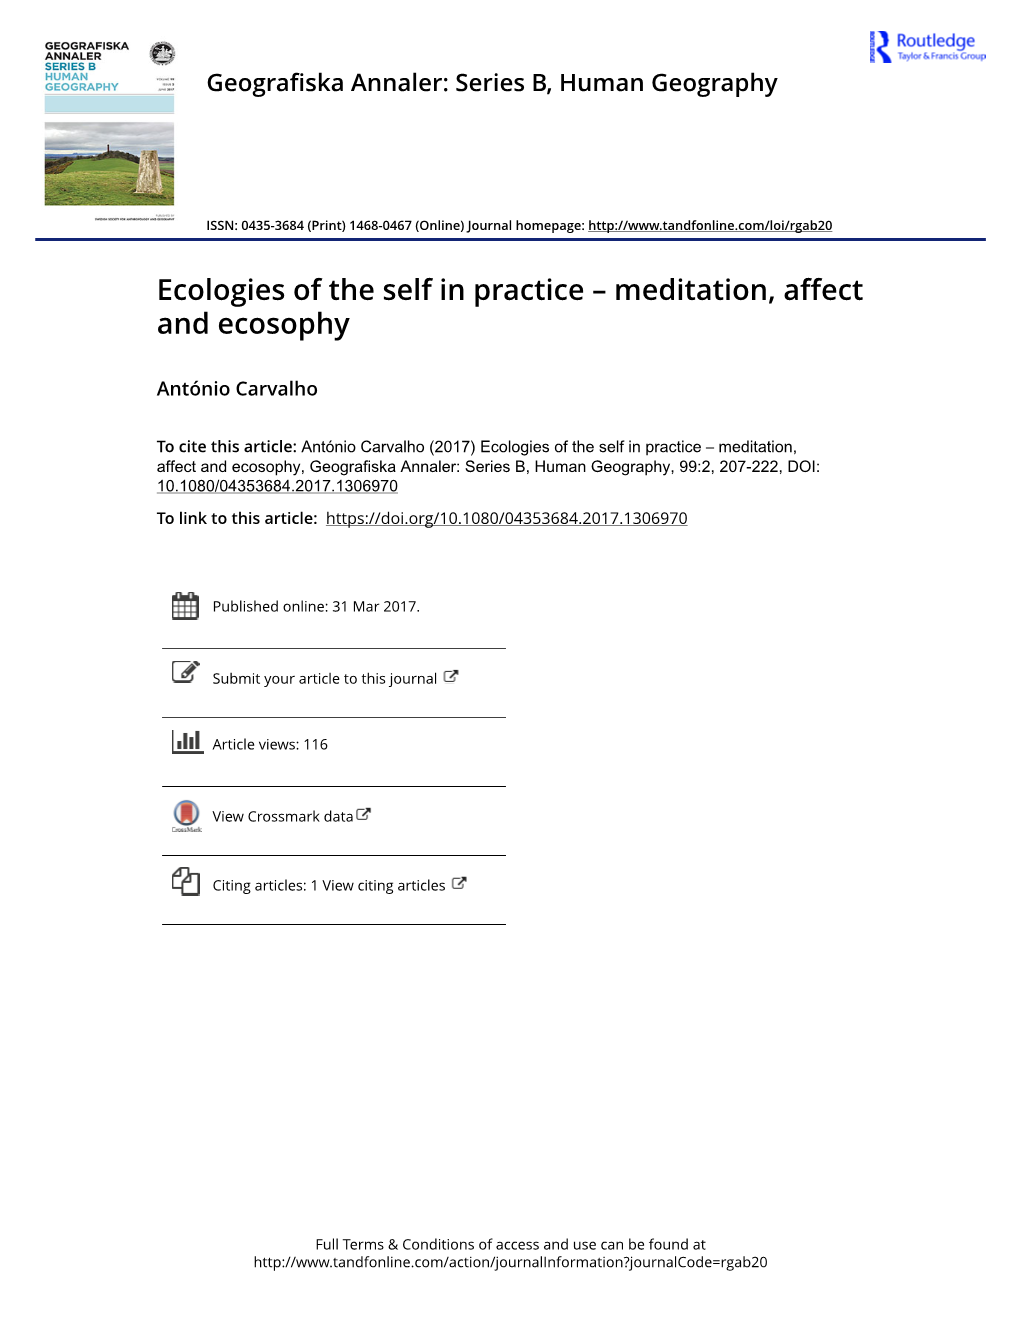 Ecologies of the Self in Practice – Meditation, Affect and Ecosophy